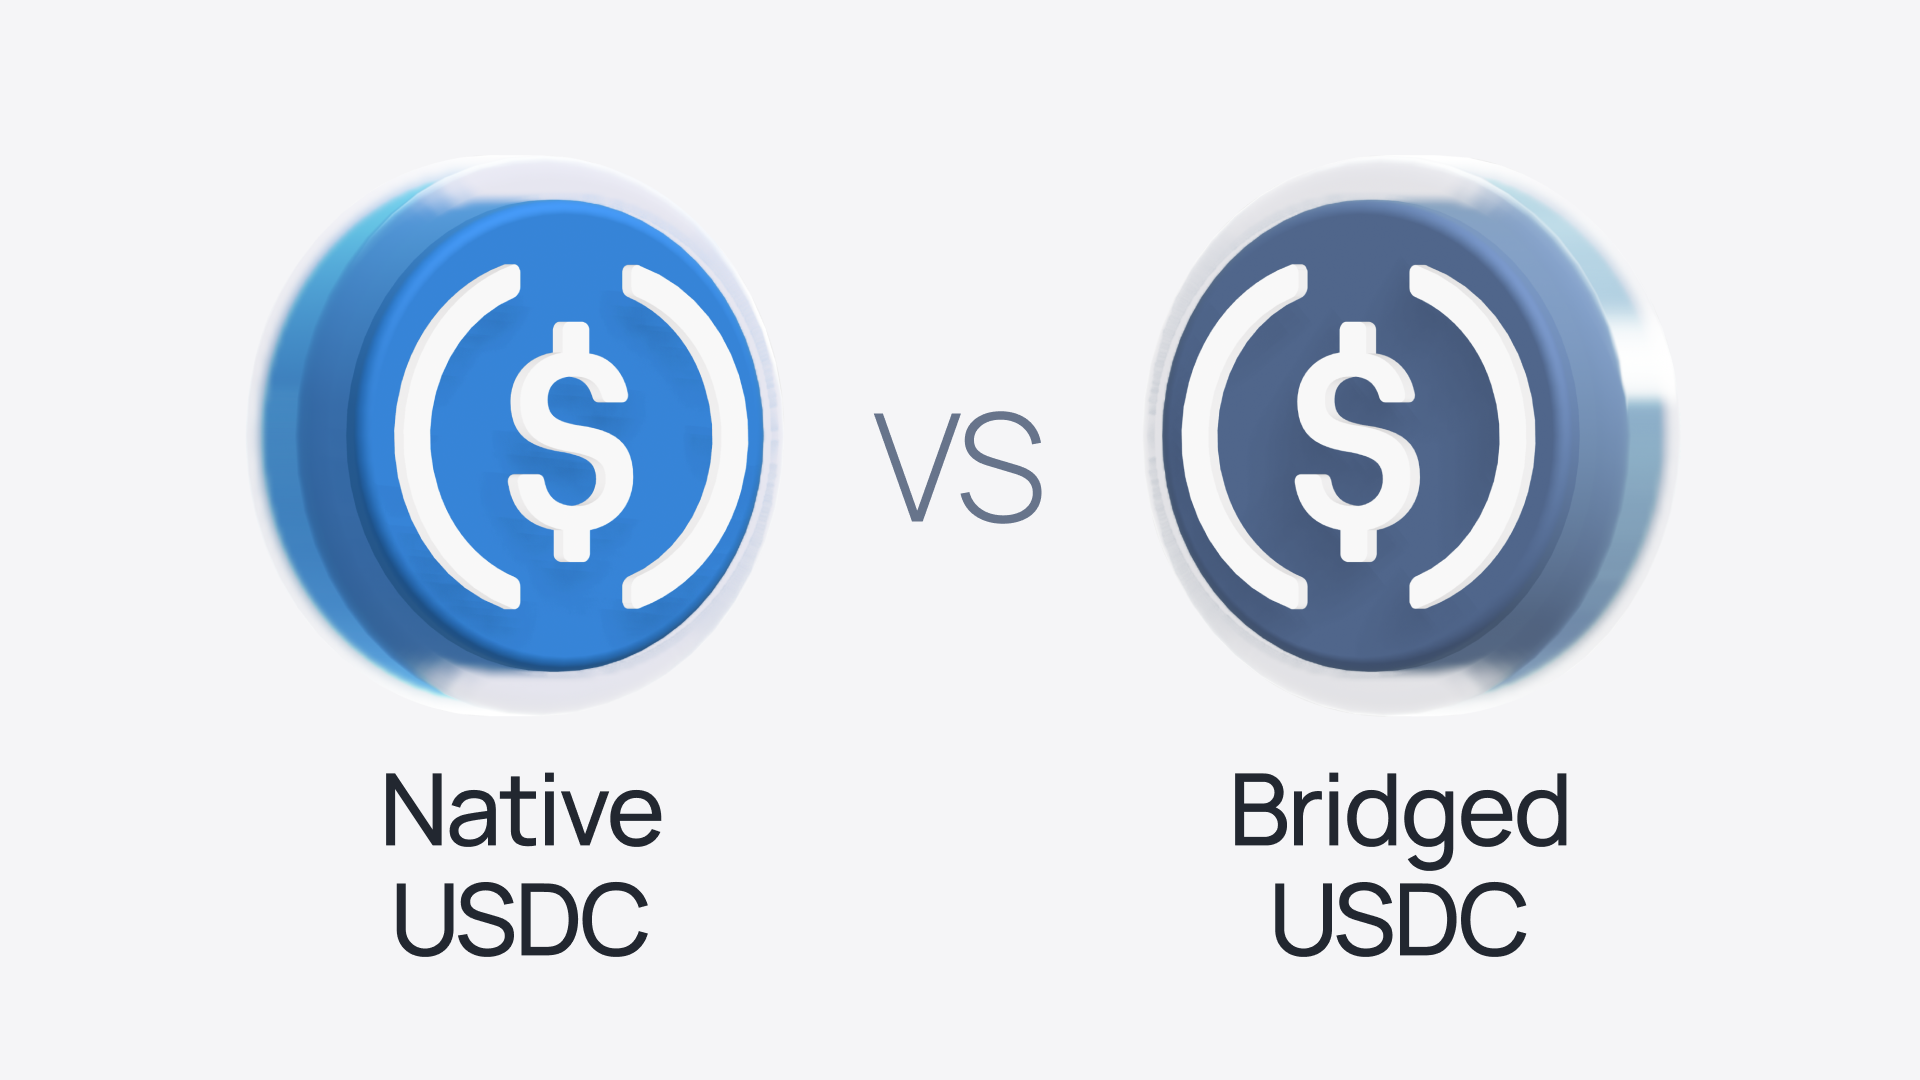 USDC.e on Fantom: The Pathway From Bridged to Native Stablecoin